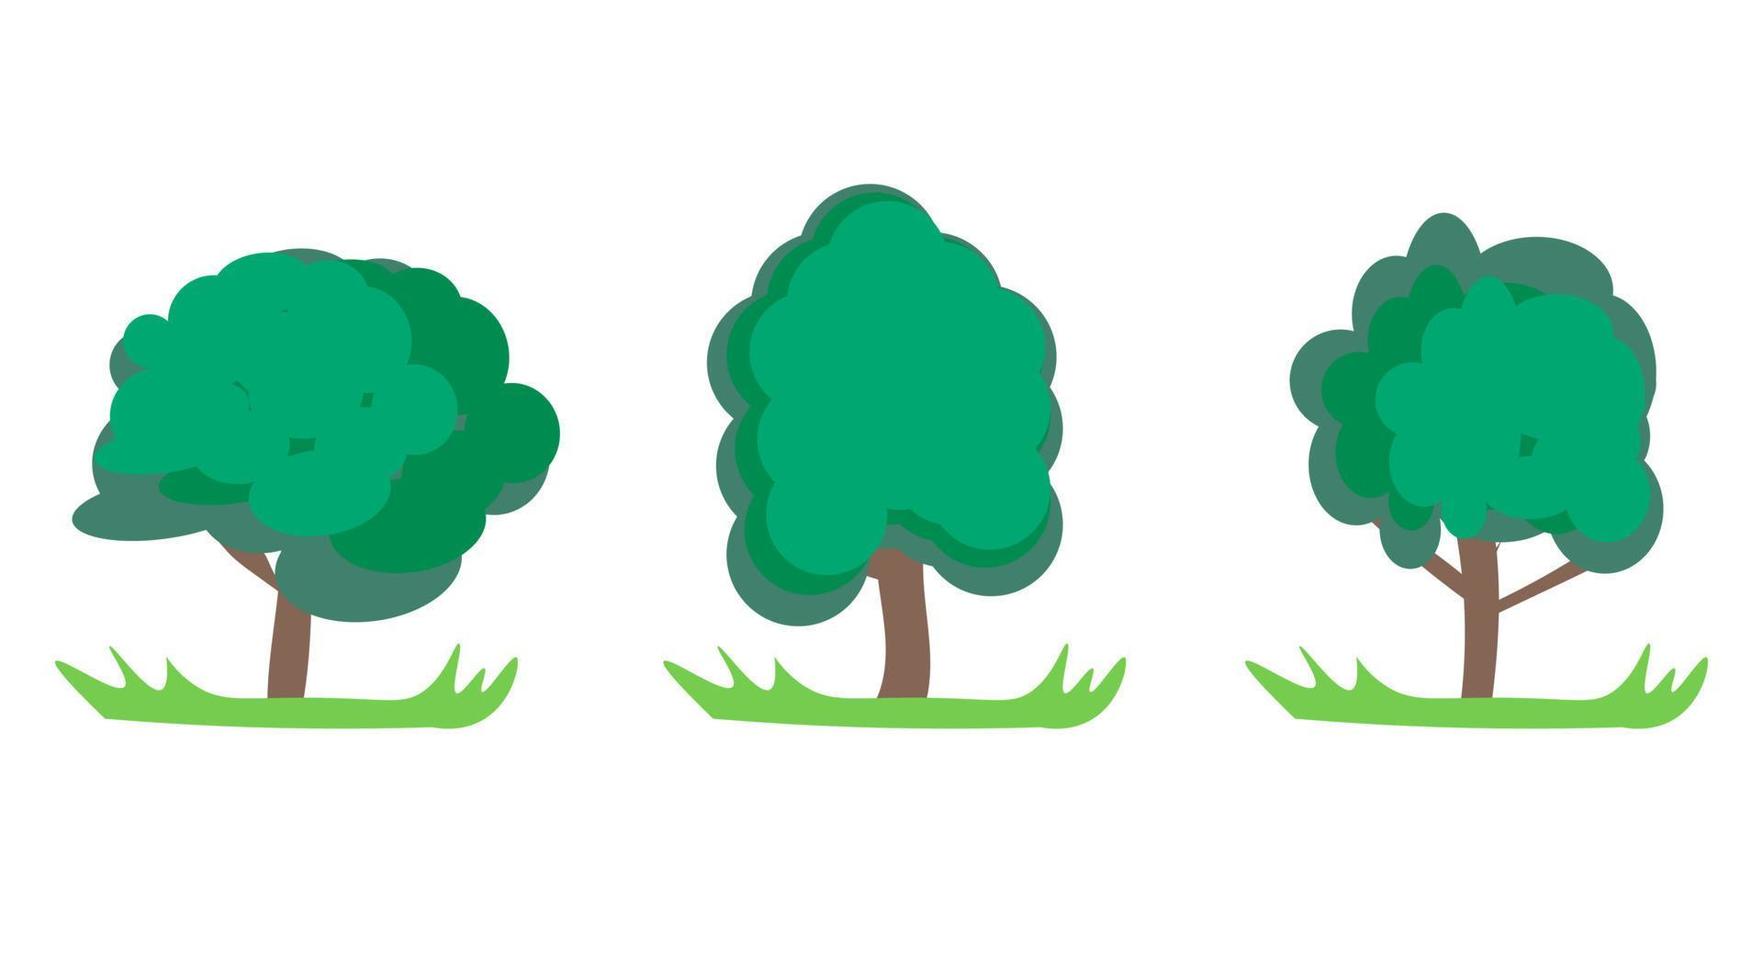 Set of abstract trees in vector eps 10. Vector hand drawn illustration in flat style.